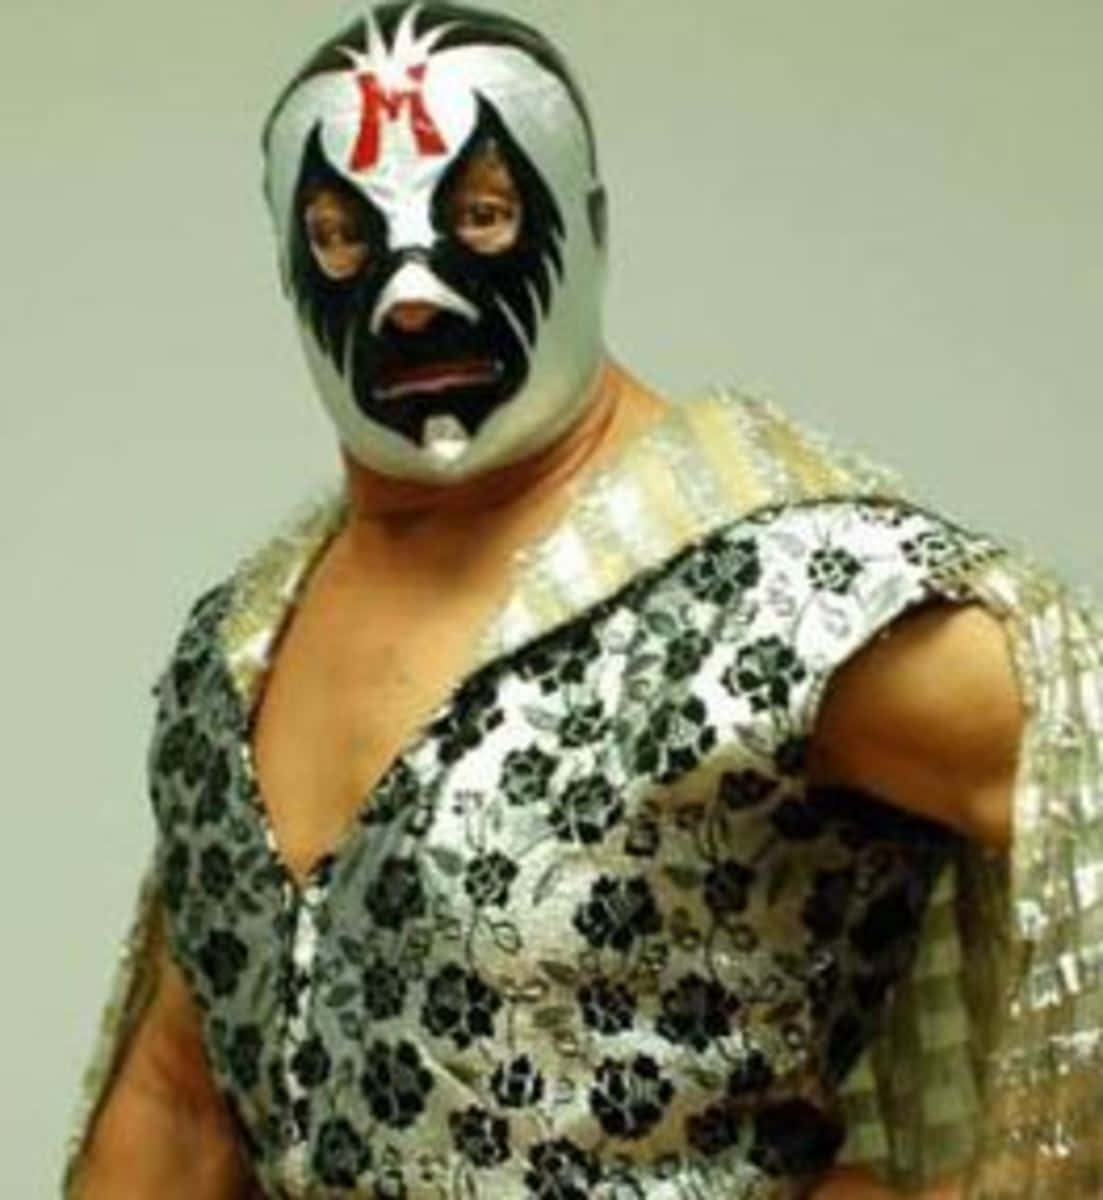 Mil Mascaras In Silver Floral Costume Wallpaper